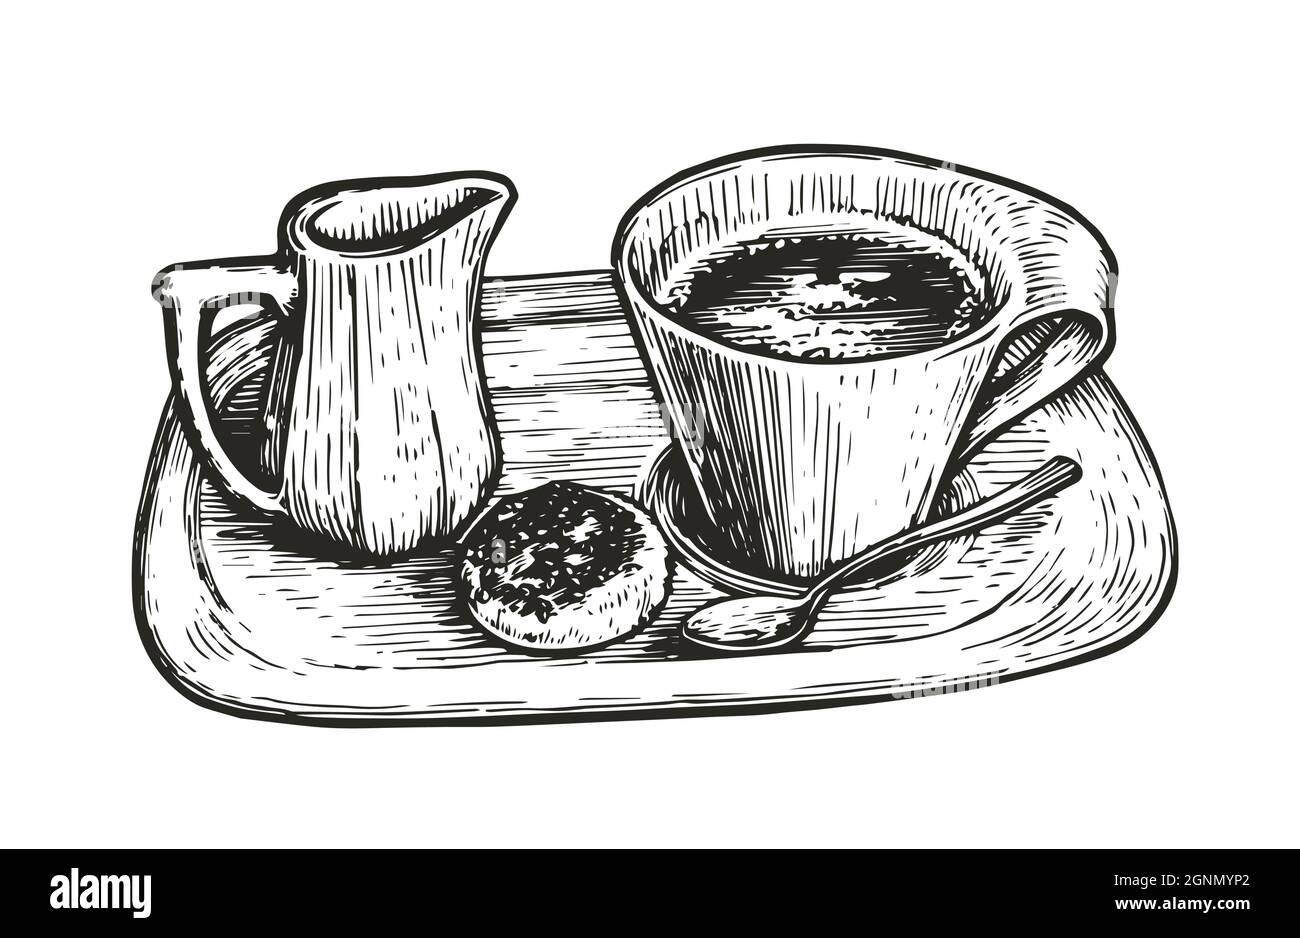 Cup of coffee on tray. Food concept sketch. Vector illustration for cafe or restaurant menu decoration Stock Vector